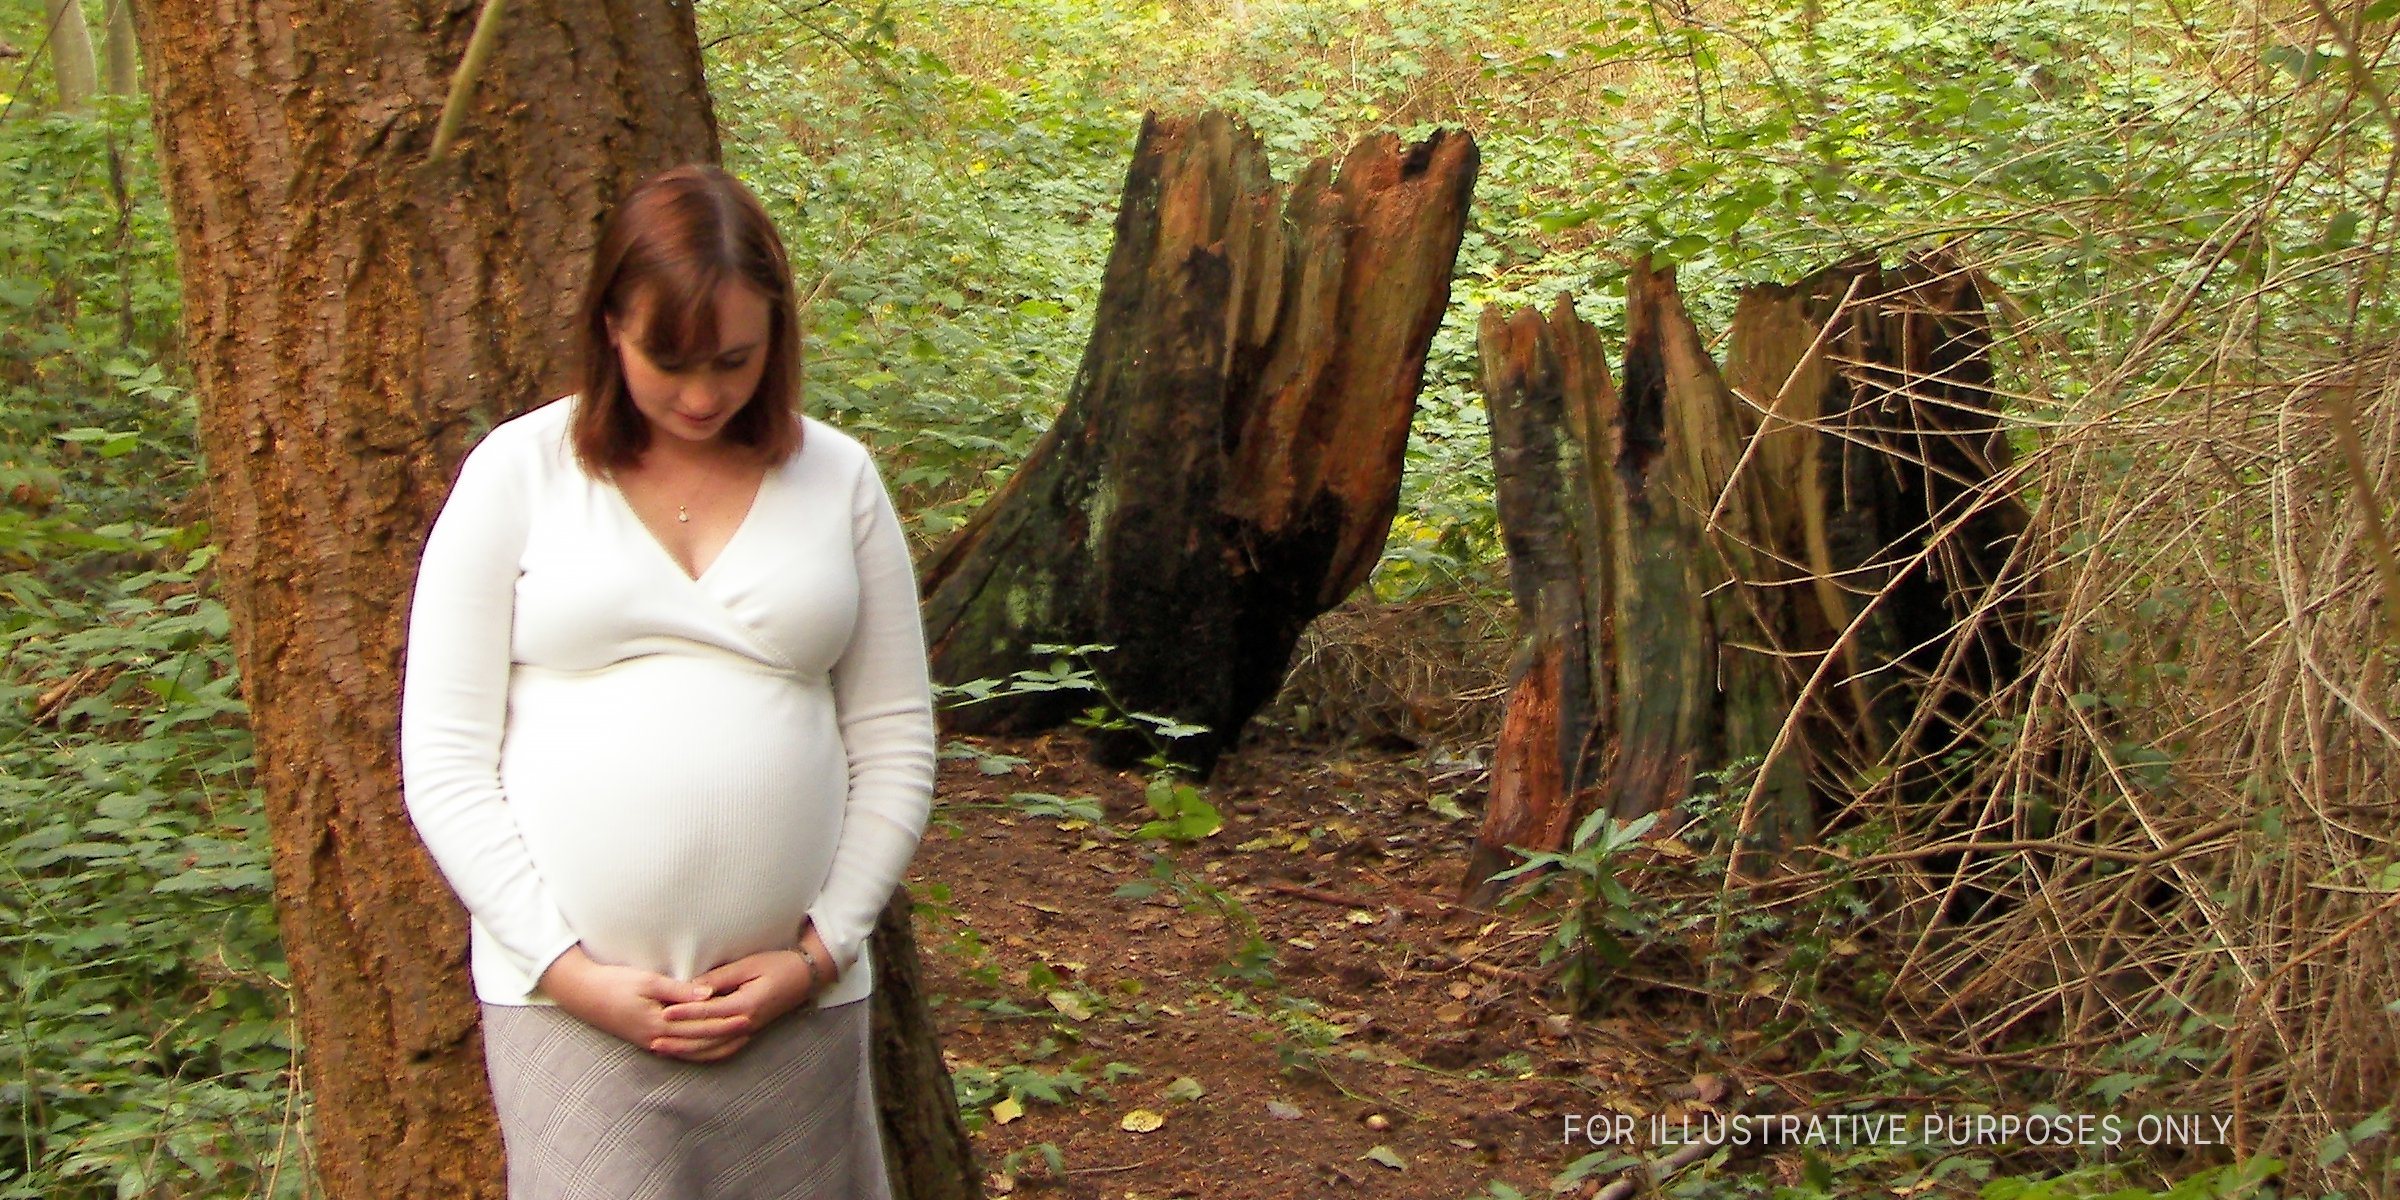 Pregnant woman in the woods. | Source: Flickr/Technomancy (CC BY-SA 2.0)